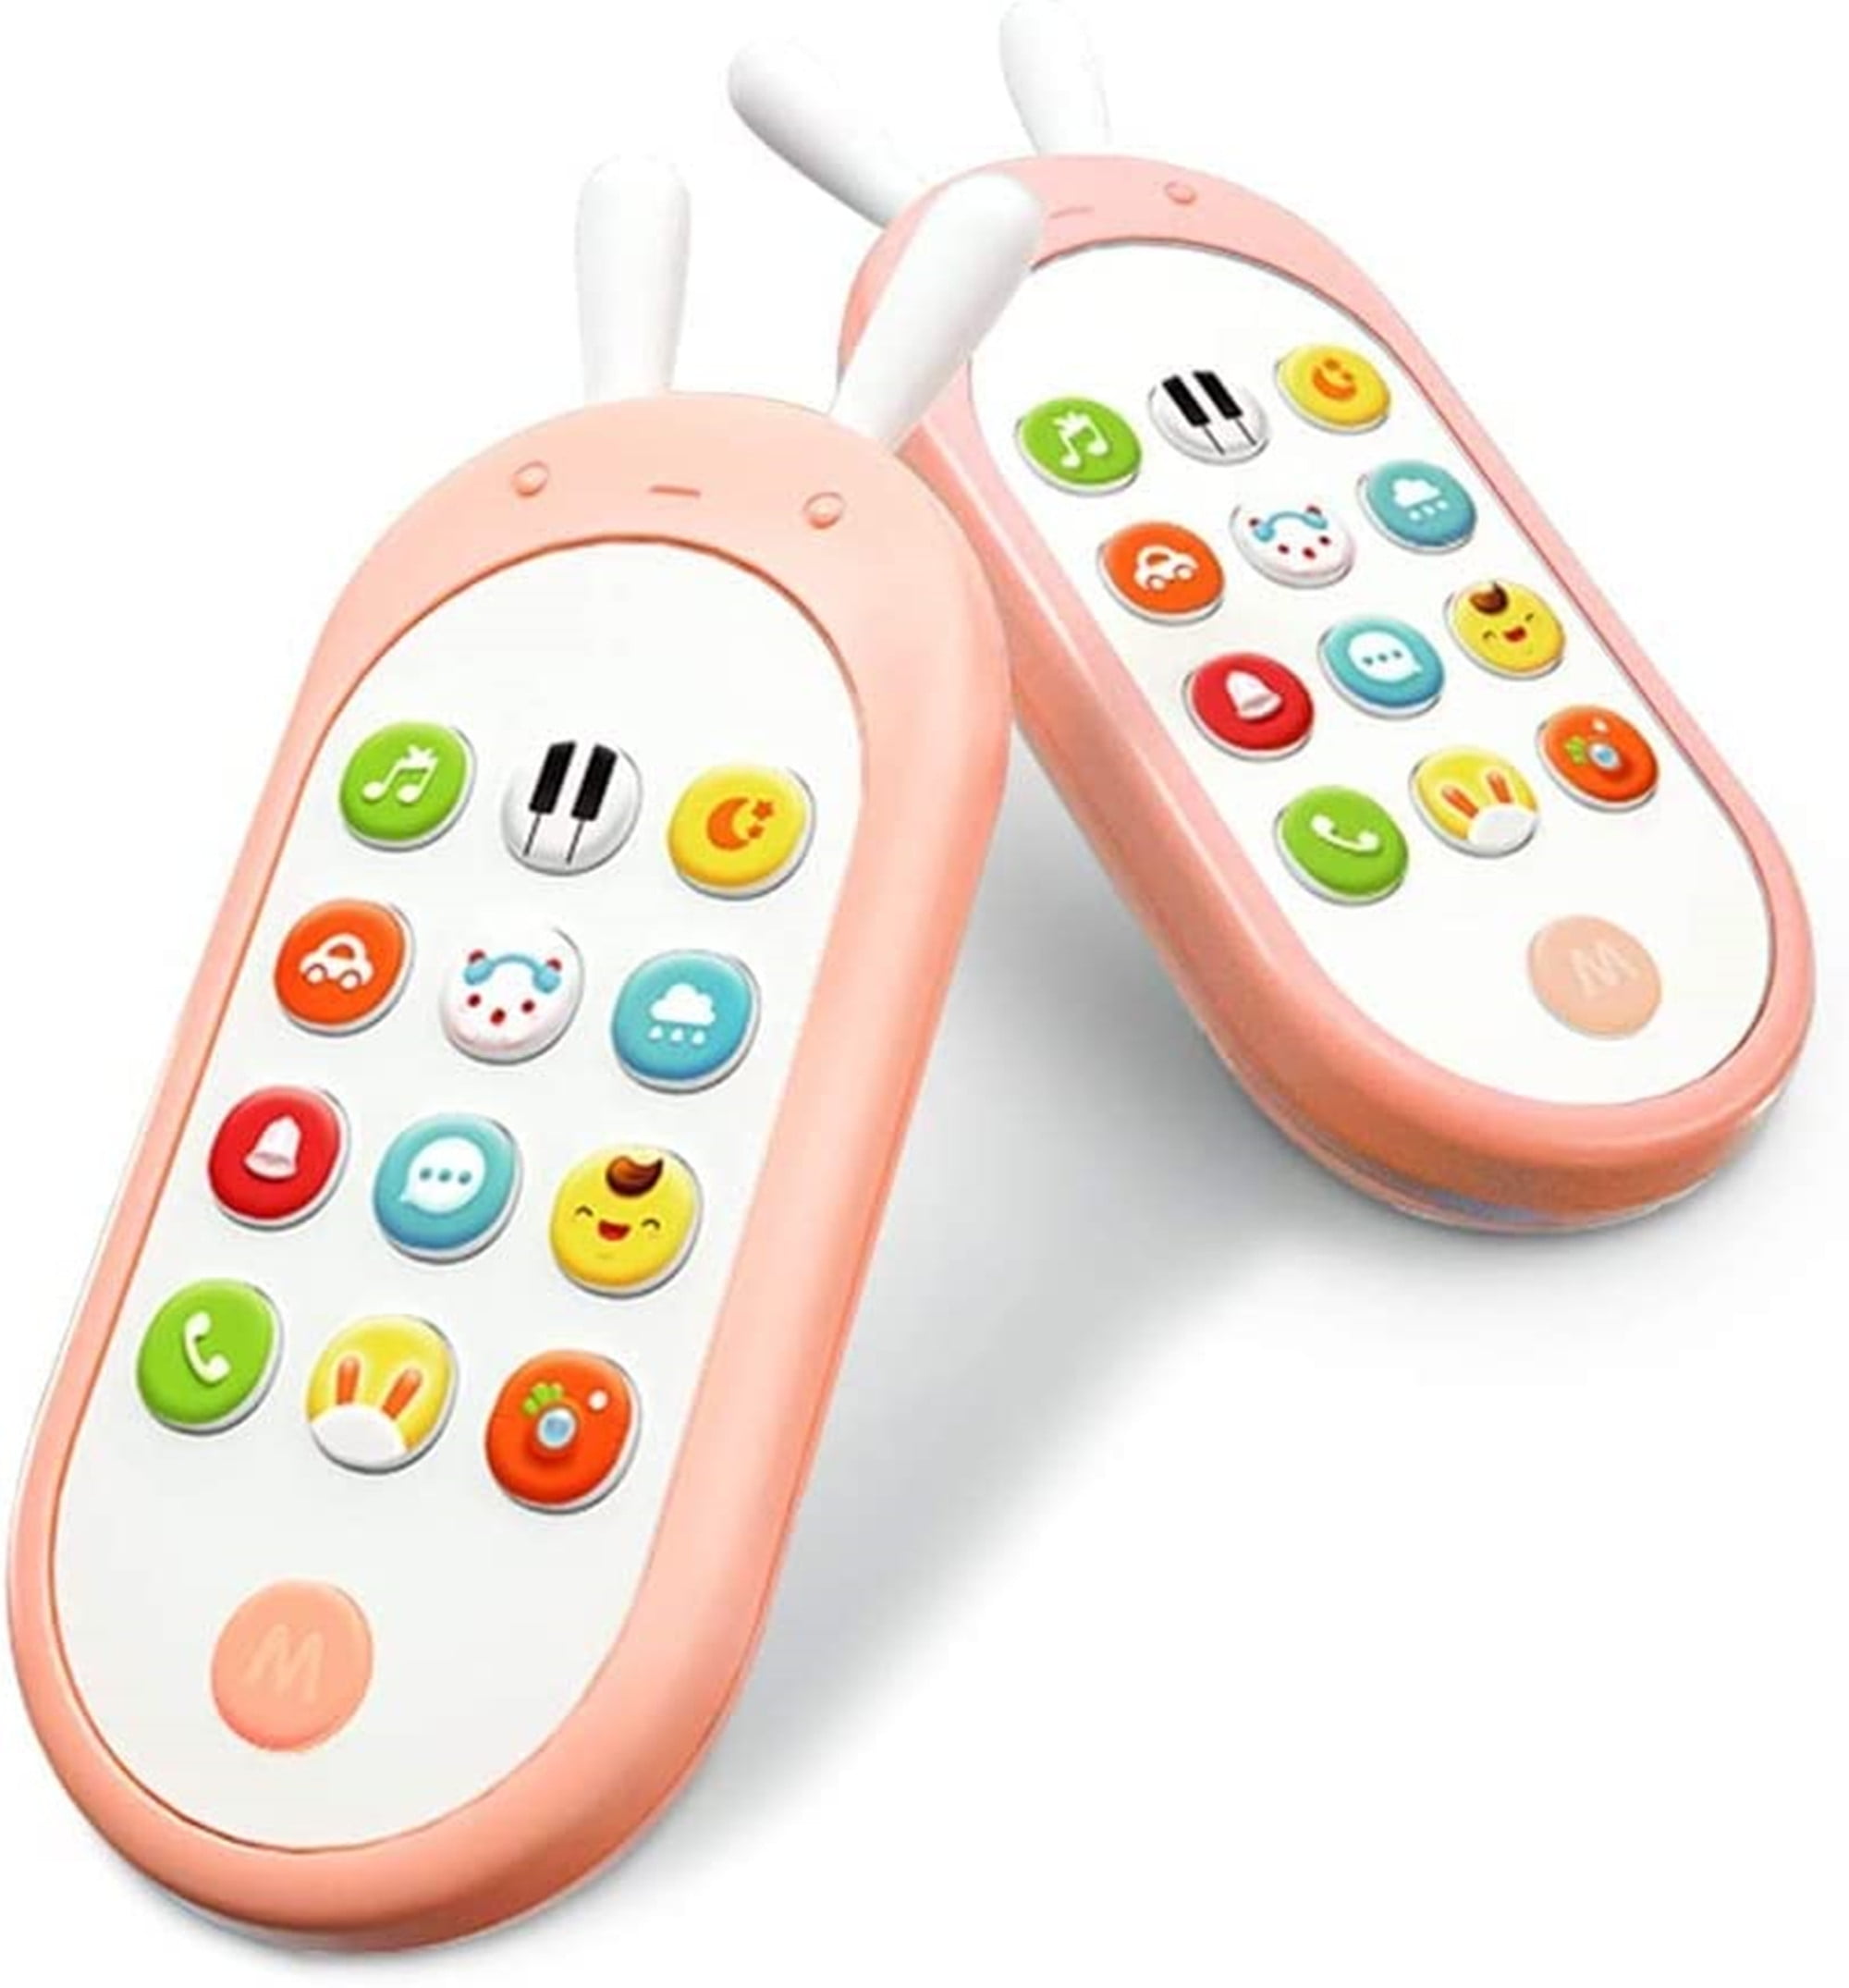 M N CREATION Baby Smiles Smart Phone Cordless Mobile Phone Baby Funny Phone  Toy Light Music Toddler Kids (Musical Mobile)